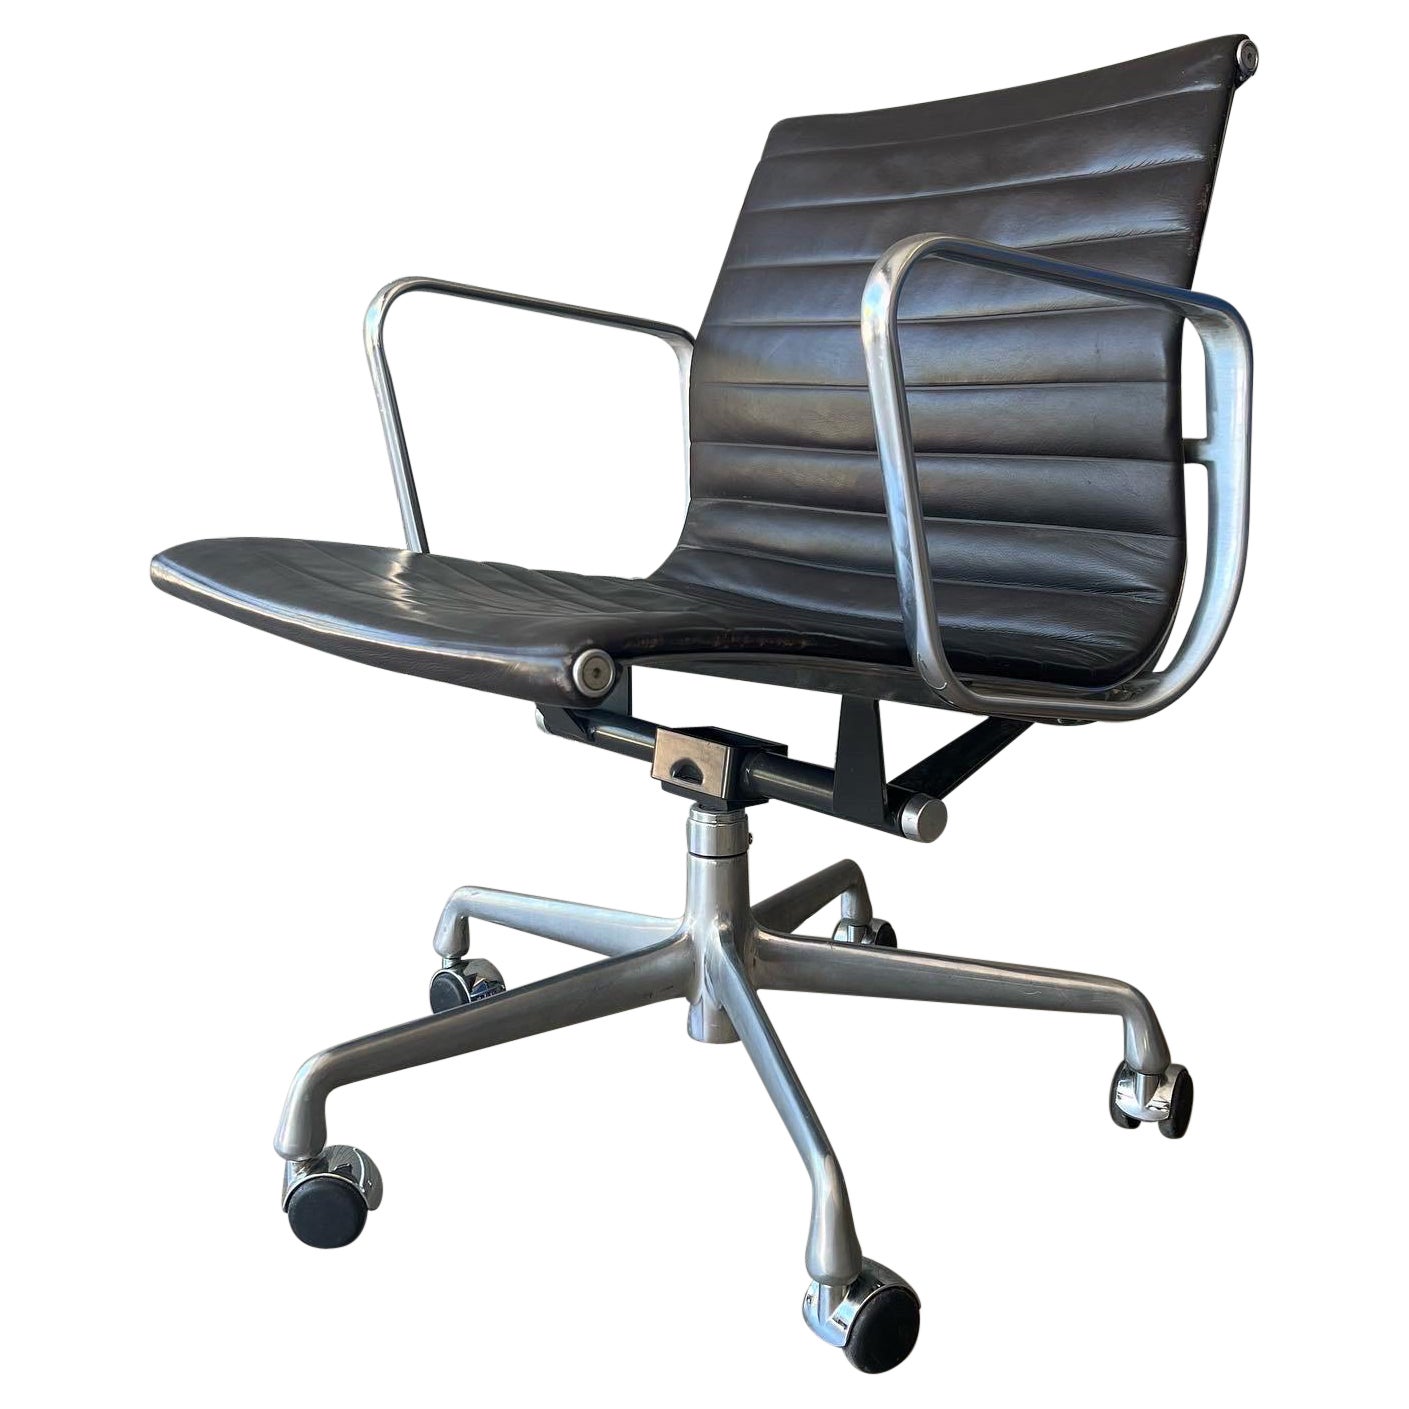 Eames Aluminum Group management chair in leather for Herman Miller